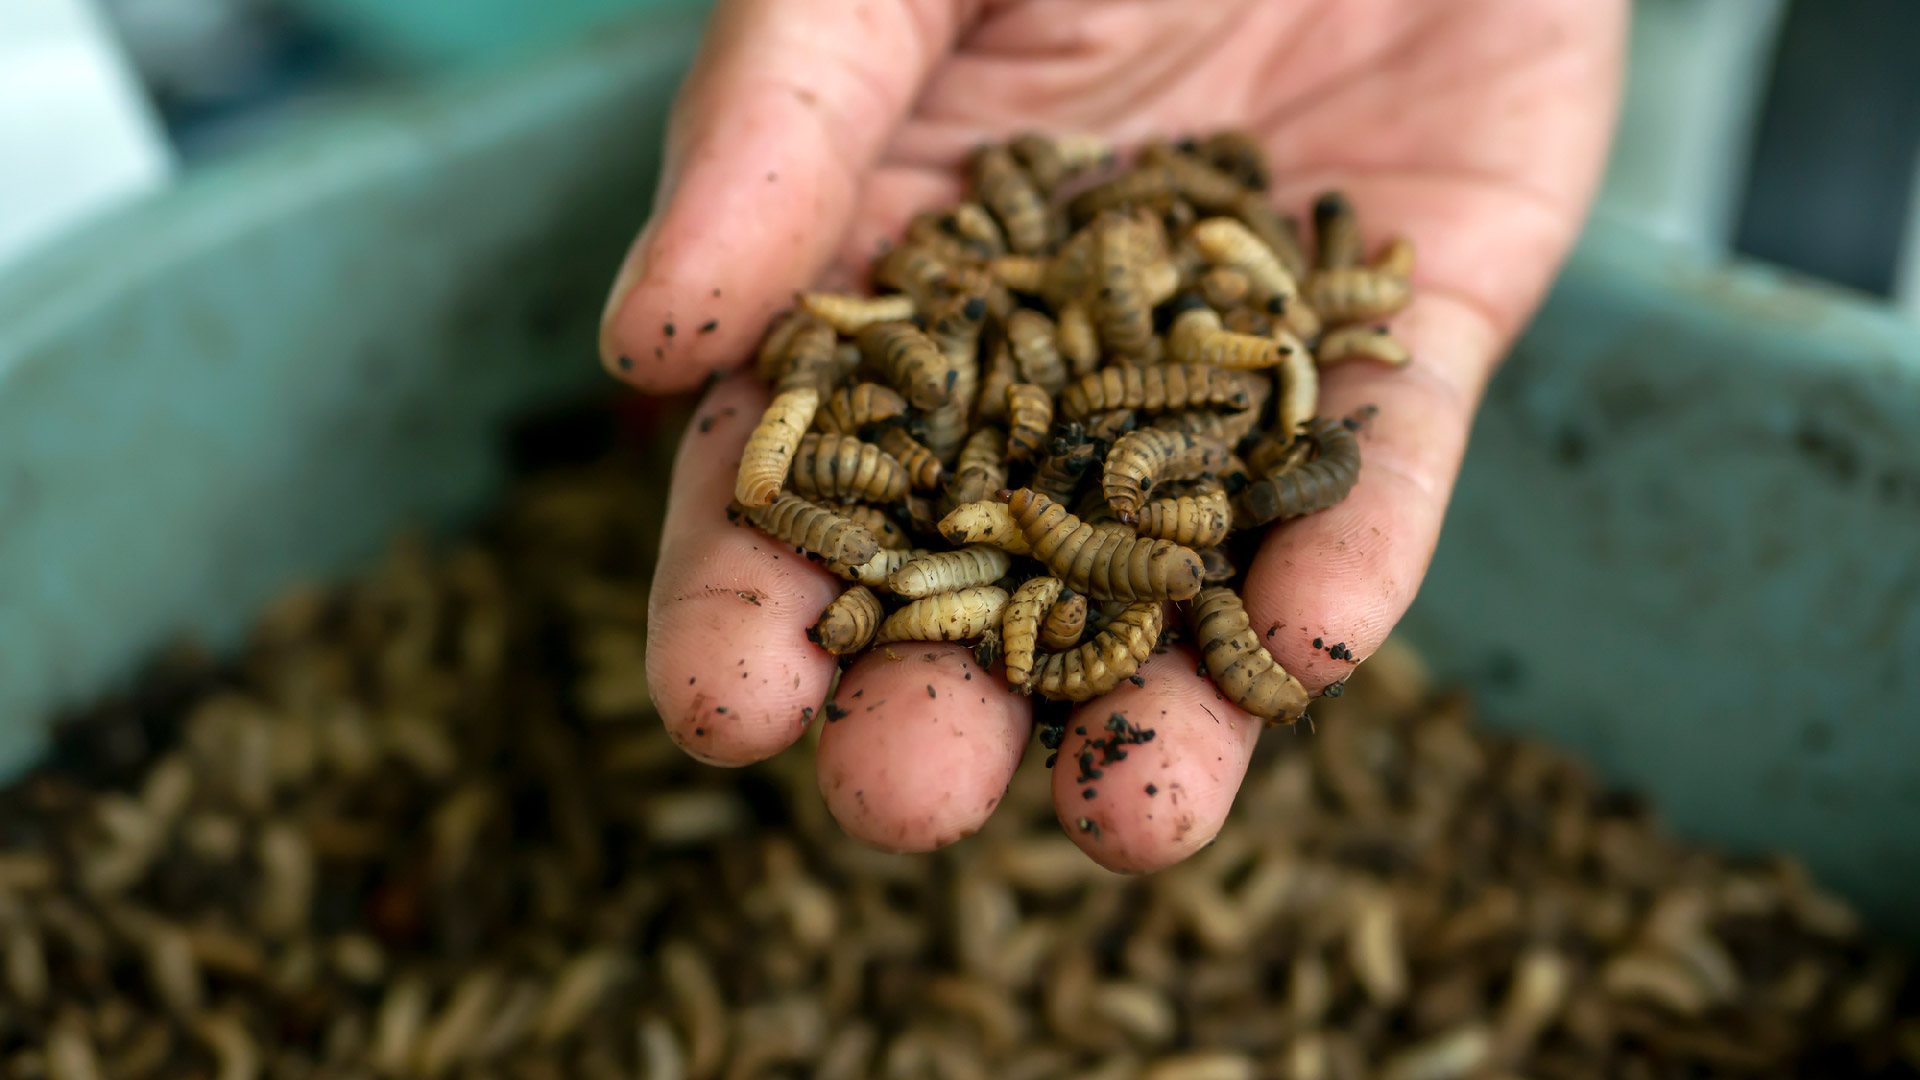 Would you like flies with that? Prepare for the future of food